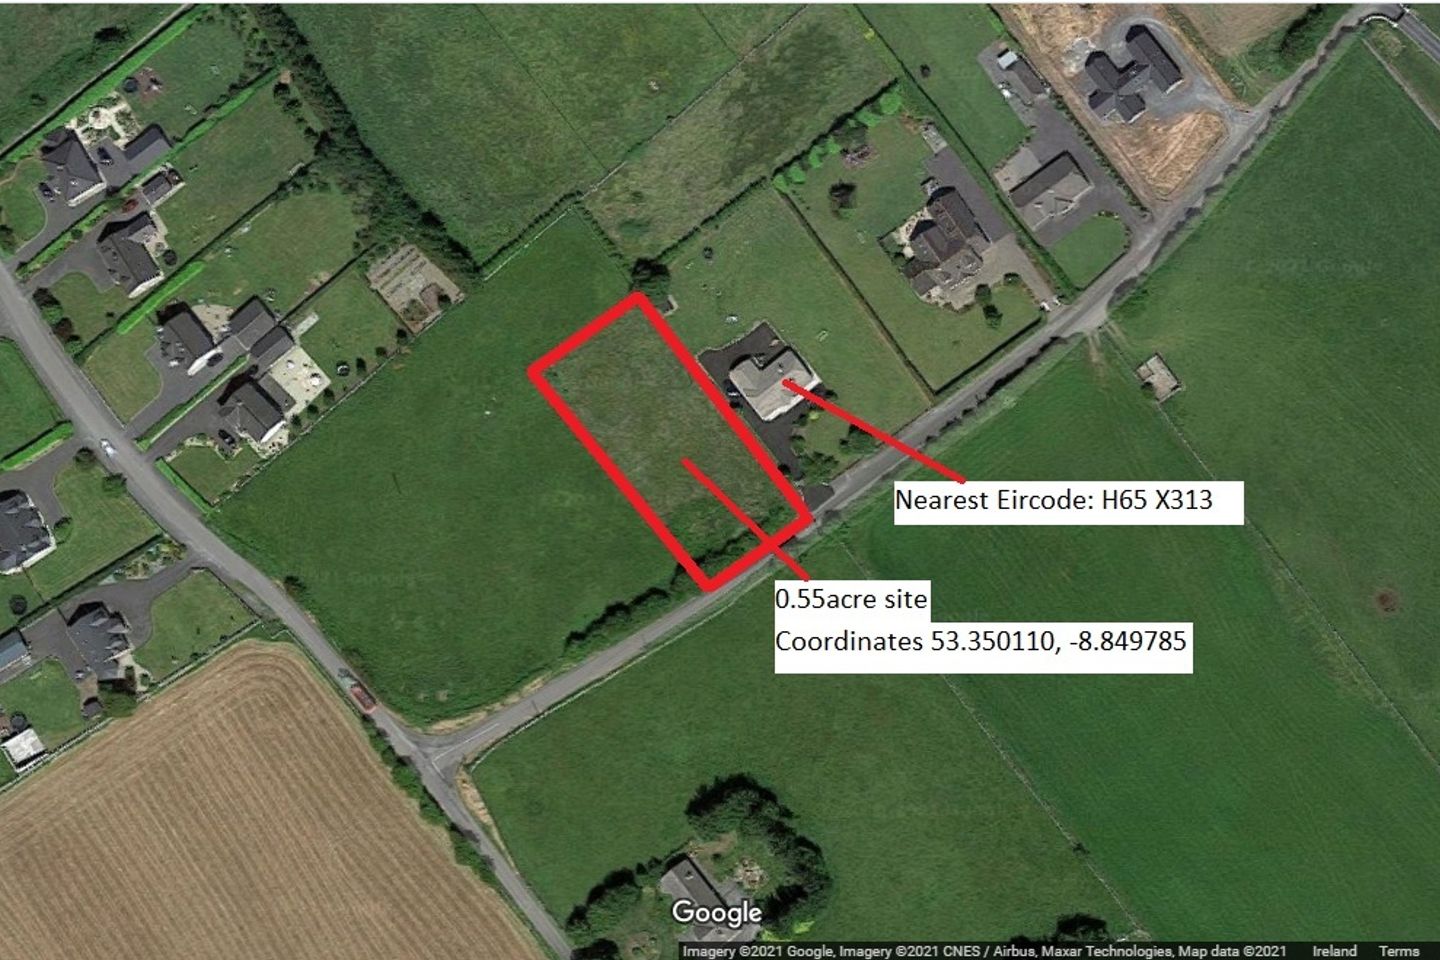 0.55 acre site at Grange East, Turloughmore, Co. Galway